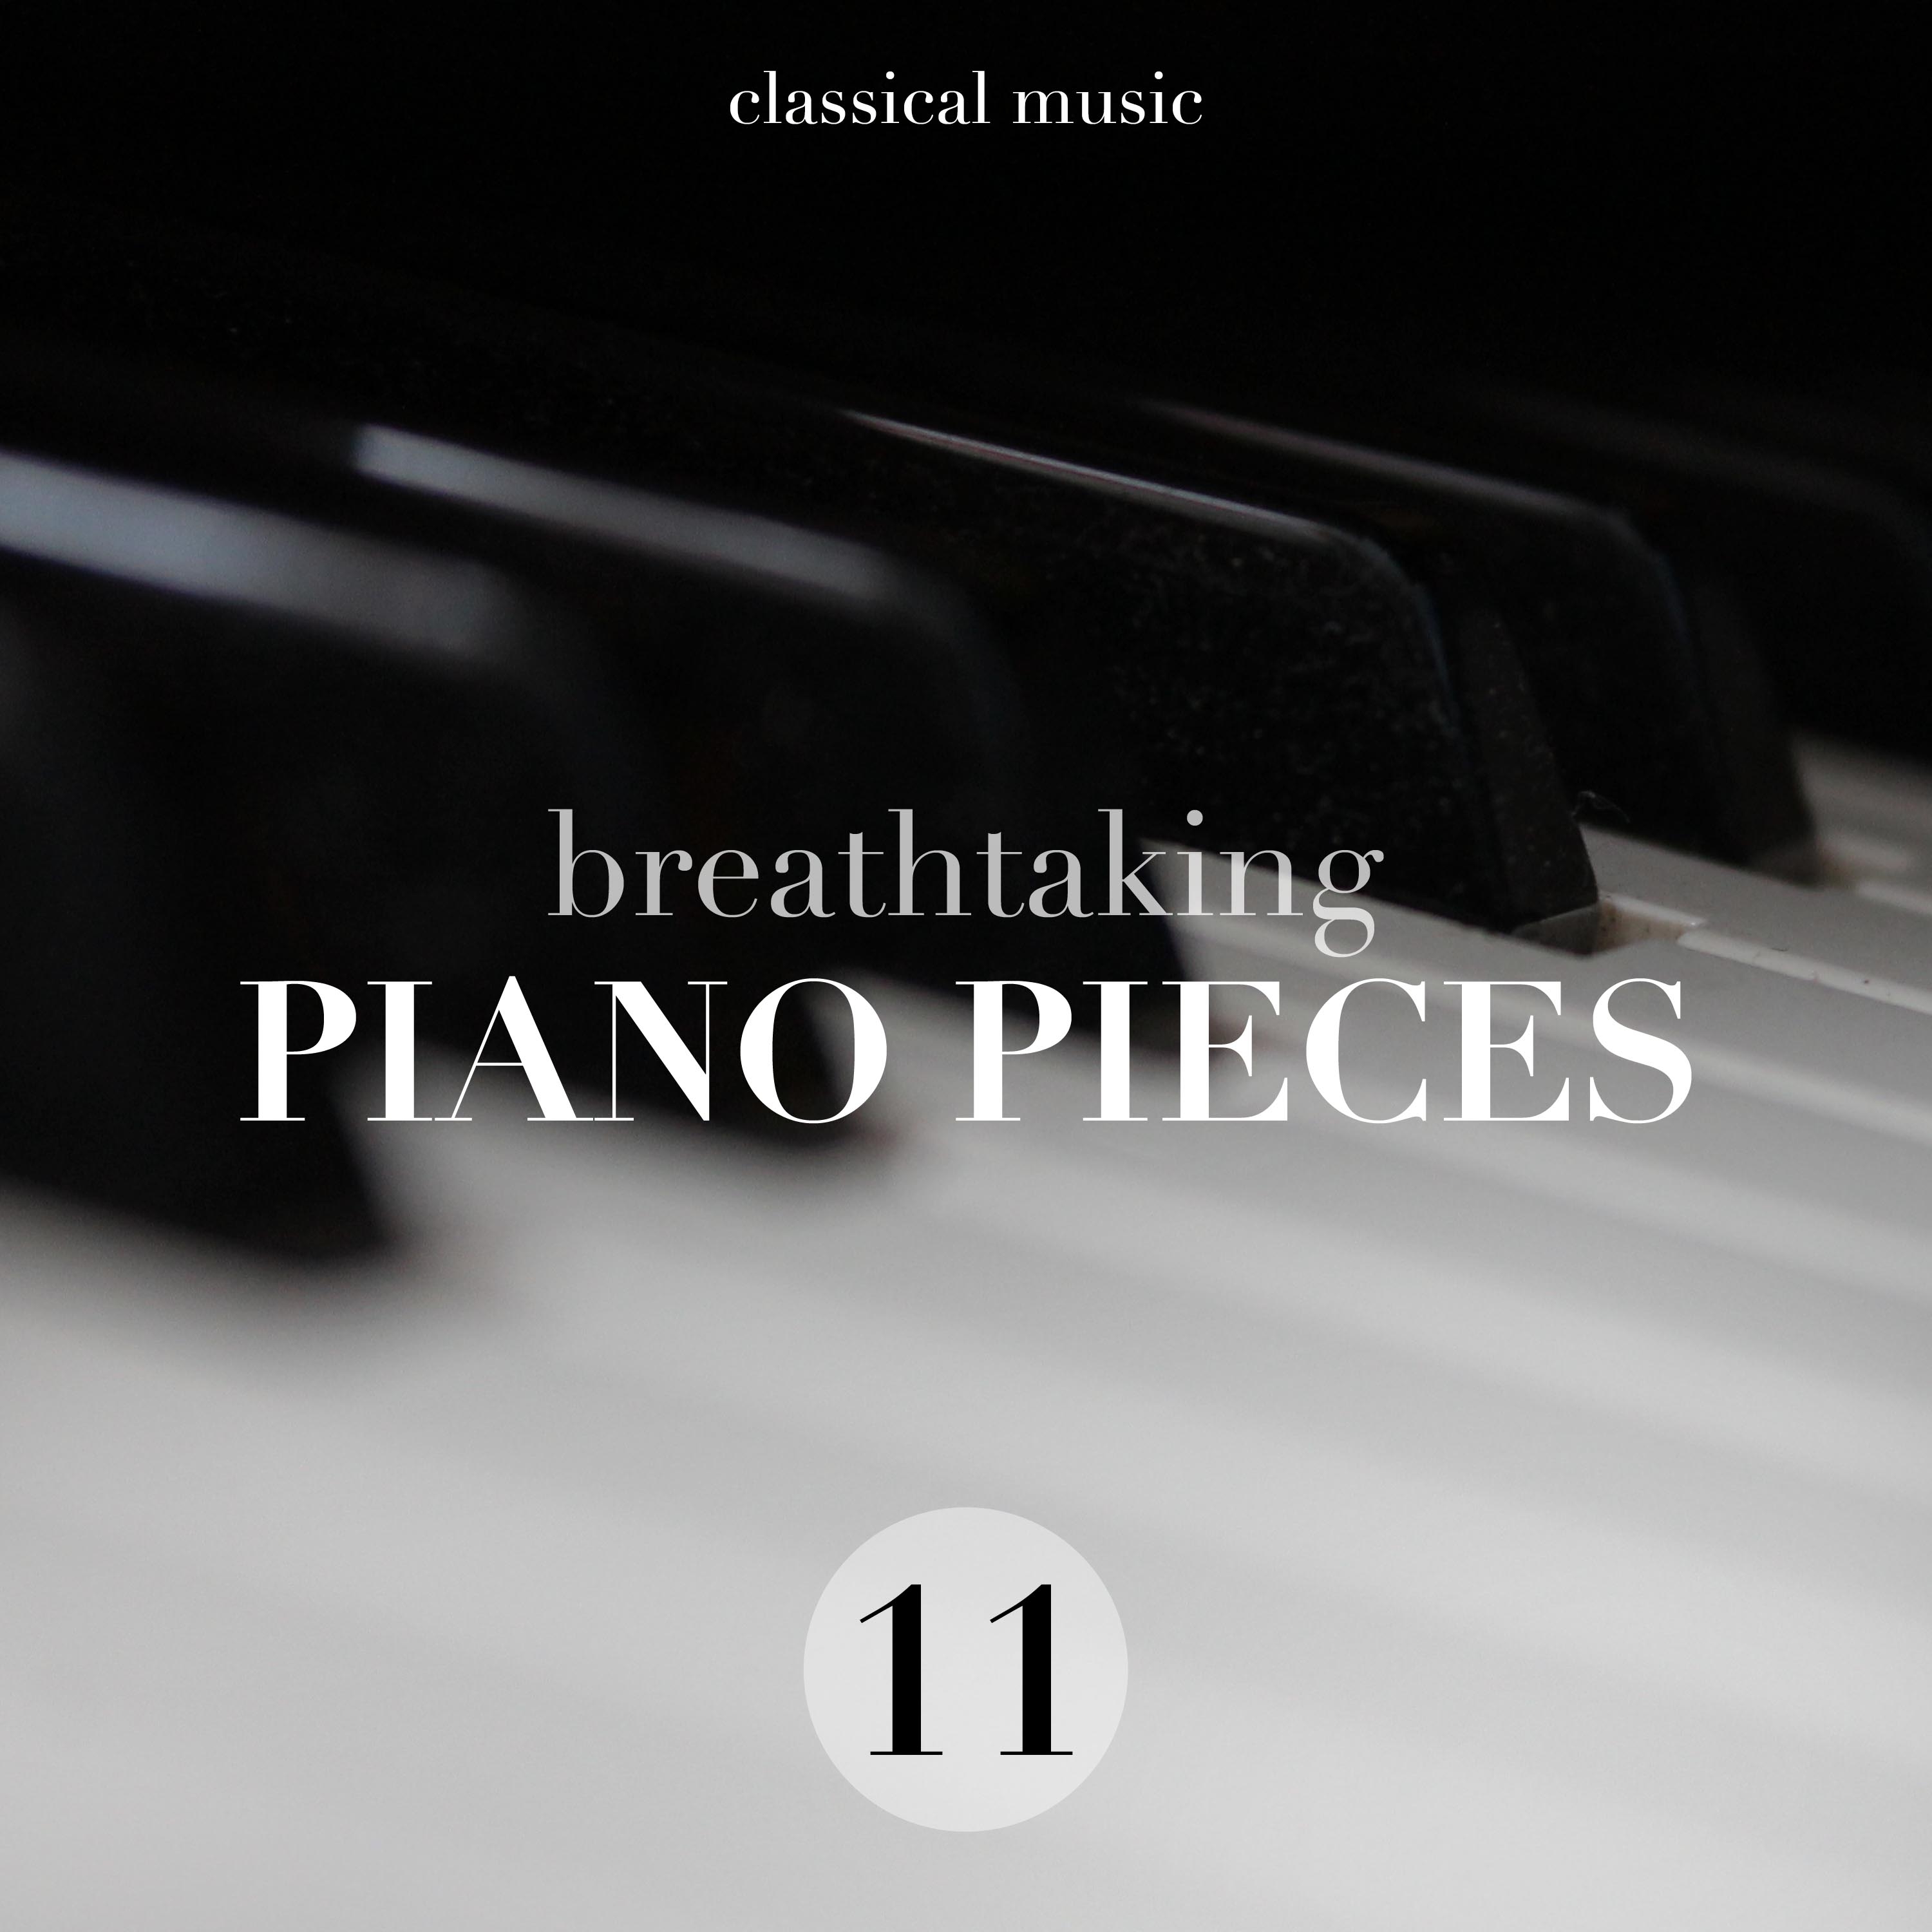 11 Breathtaking Piano Pieces - Let this Peaceful, Calming and Soothing Piano Music Help you Relax